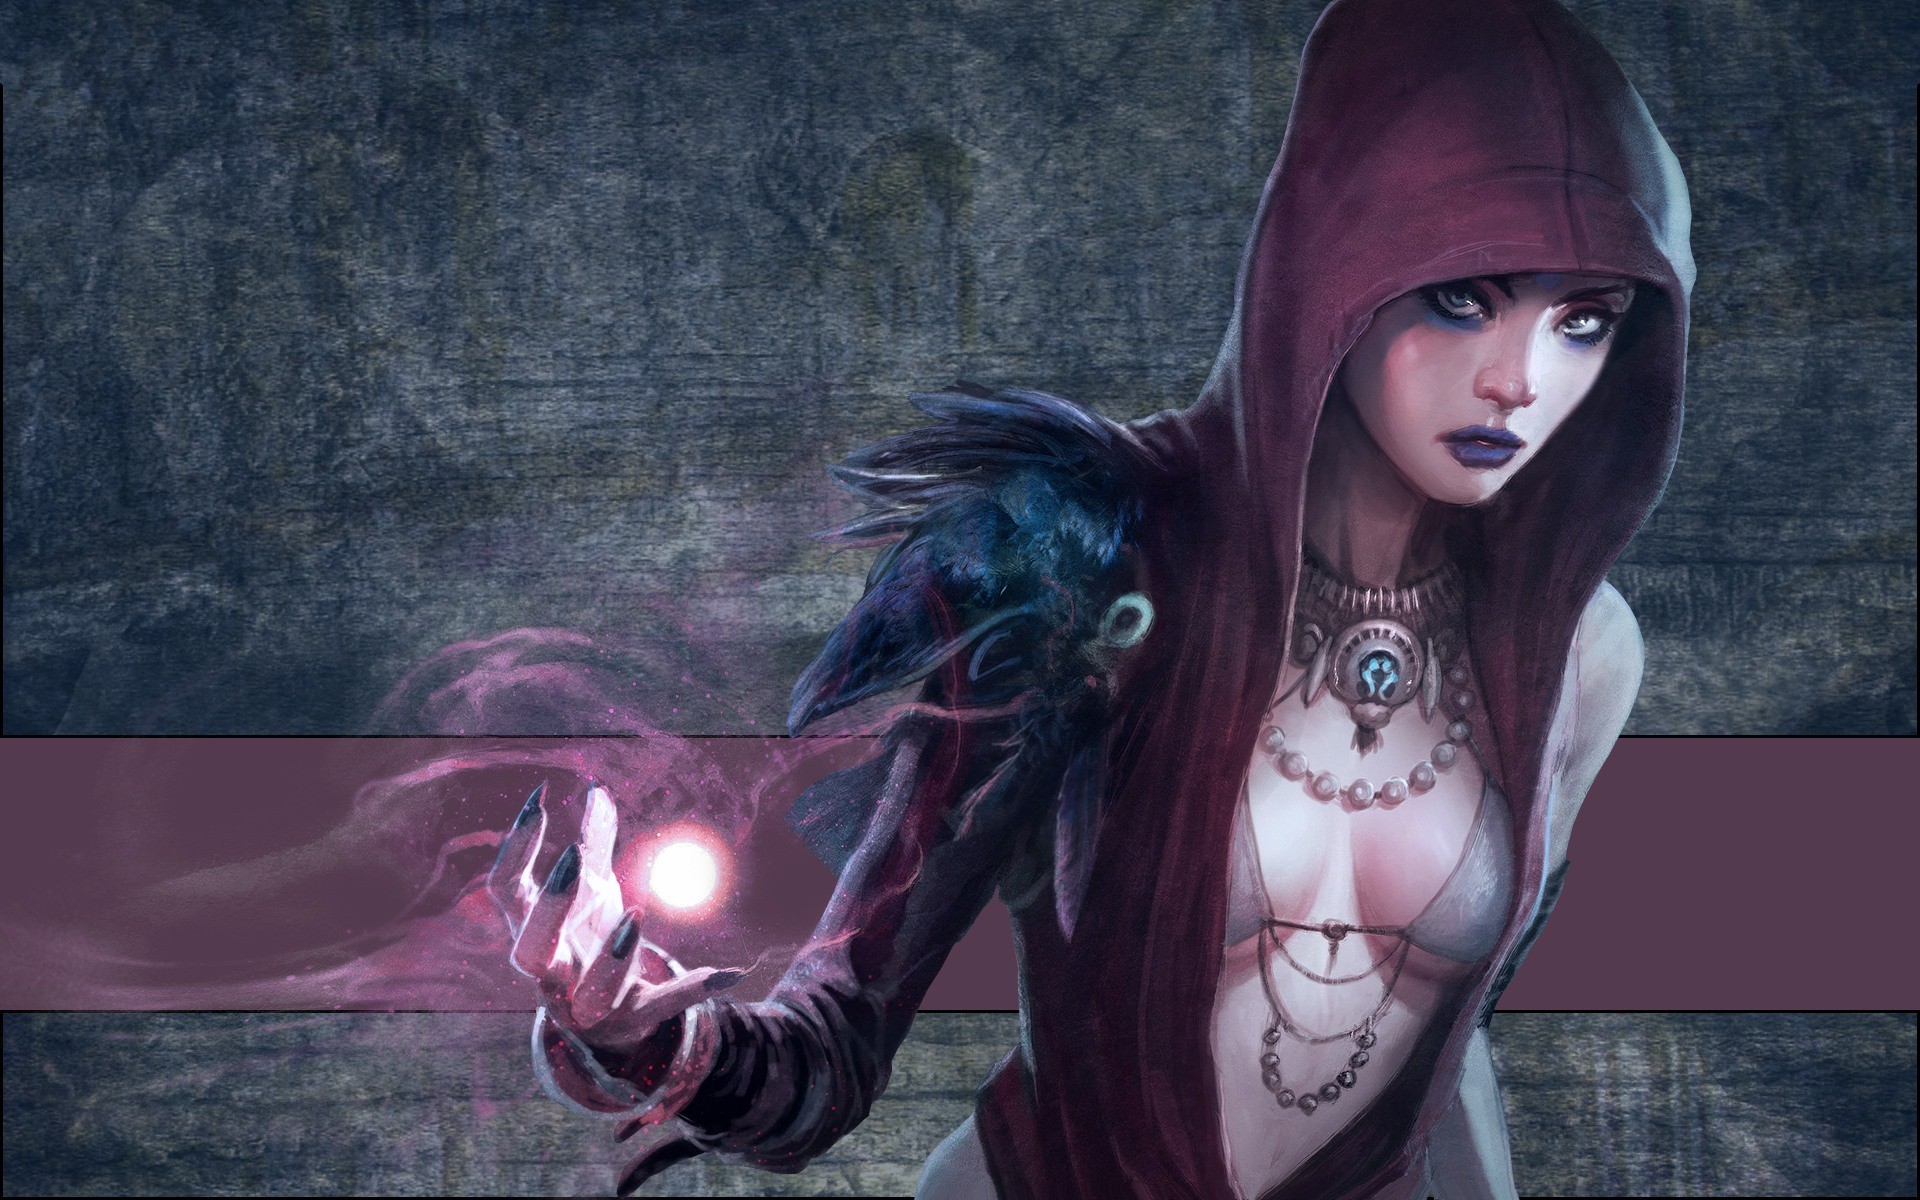 General 1920x1200 Dragon Age video games artwork women fantasy girl video game girls hoods boobs fantasy art video game art Morrigan (Dragon Age) purple lipstick magic looking at viewer fan art painted nails